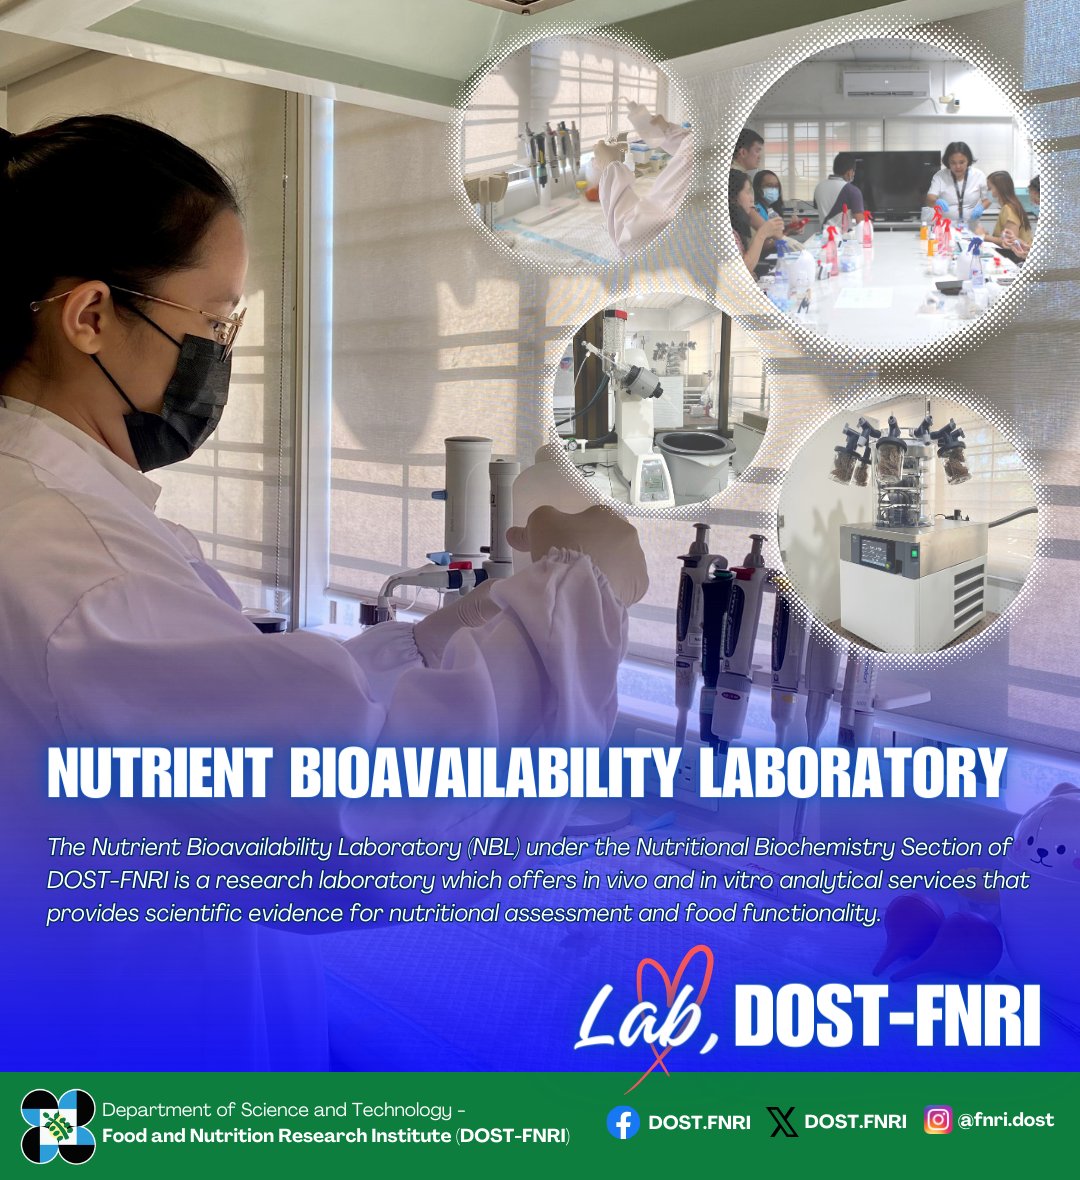 The DOST-FNRI's 𝗡𝘂𝘁𝗿𝗶𝗲𝗻𝘁 𝗕𝗶𝗼𝗮𝘃𝗮𝗶𝗹𝗮𝗯𝗶𝗹𝗶𝘁𝘆 𝗟𝗮𝗯𝗼𝗿𝗮𝘁𝗼𝗿𝘆 (NBL) is a research laboratory offering 𝘪𝘯 𝘷𝘪𝘷𝘰 and 𝘪𝘯 𝘷𝘪𝘵𝘳𝘰 analytical services that provides scientific evidence for nutritional assessment and food functionality.